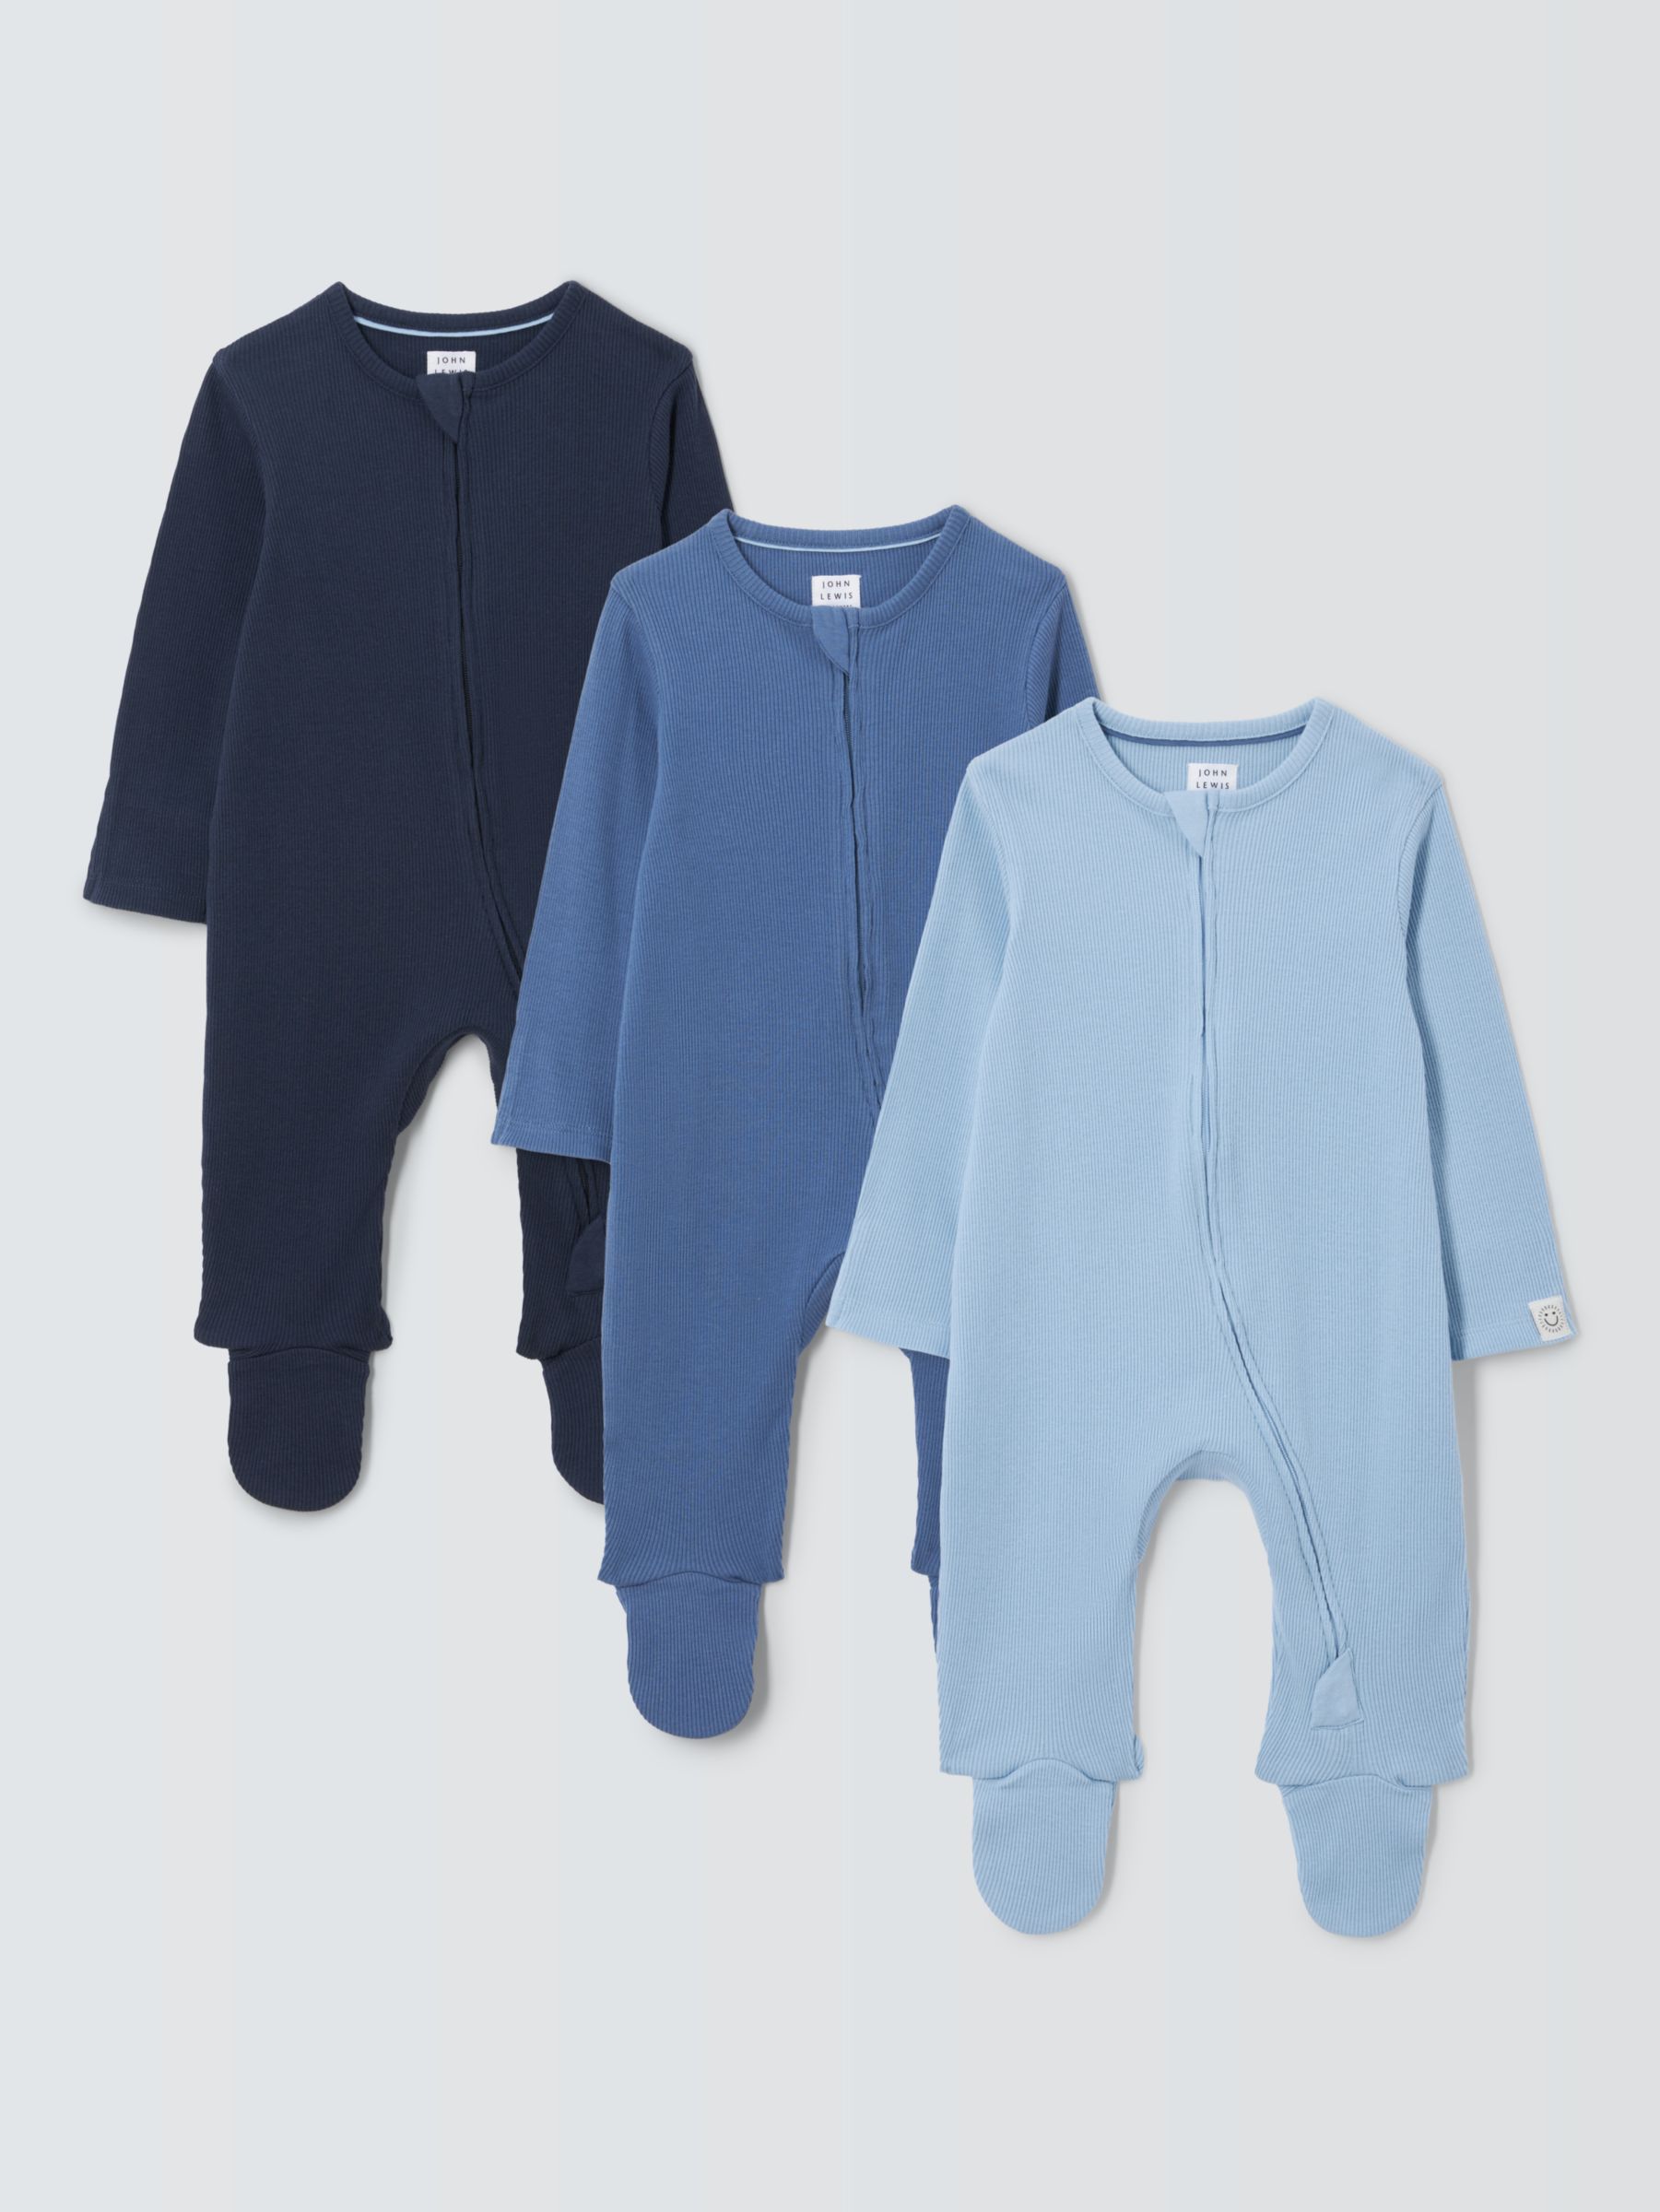 John Lewis Baby Two Way Zip Ribbed Cotton Sleepsuit, Pack of 3, Blue/Multi, 9-12 months